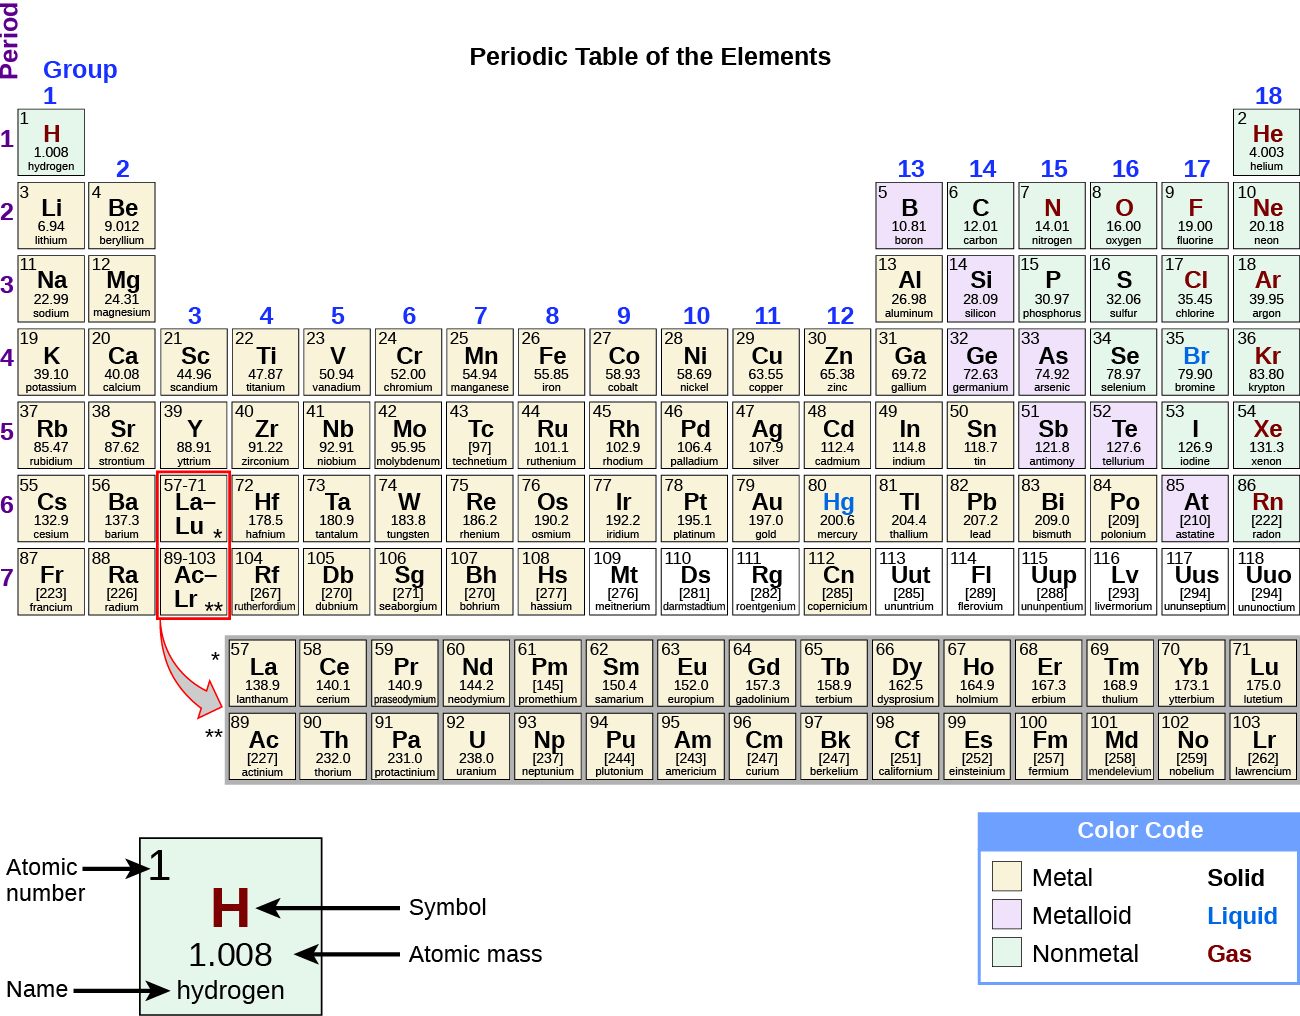 Graphic version of the periodic table of elements.